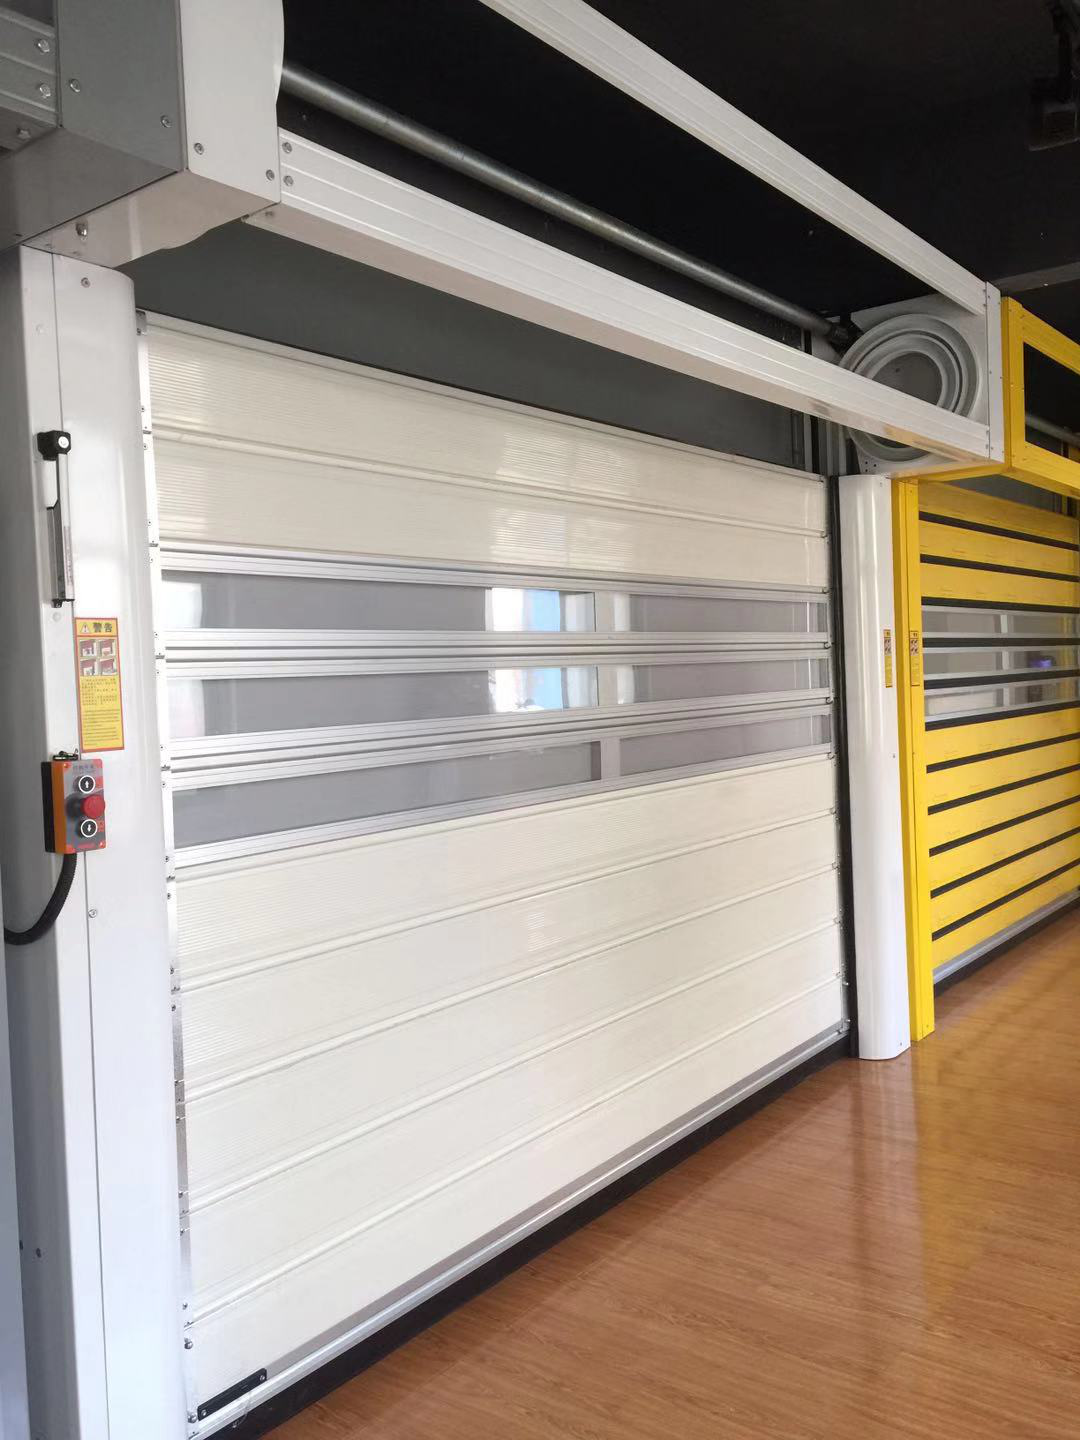 Why do you need a high speed spiral door?